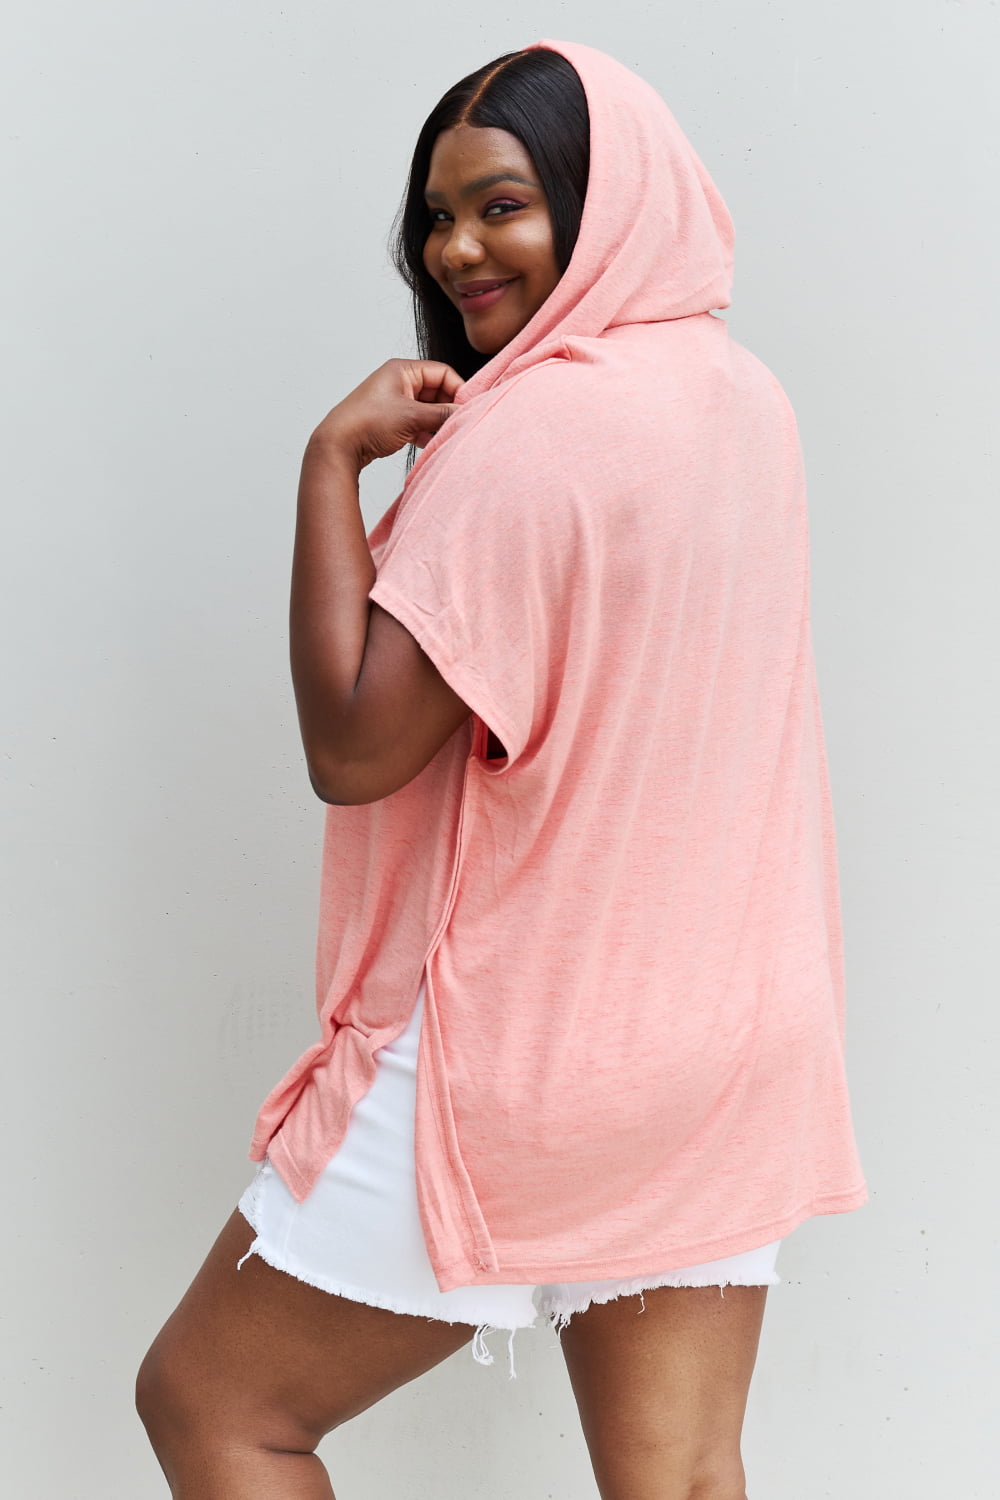 HEYSON Laid Back Full Size Hooded Poncho Top